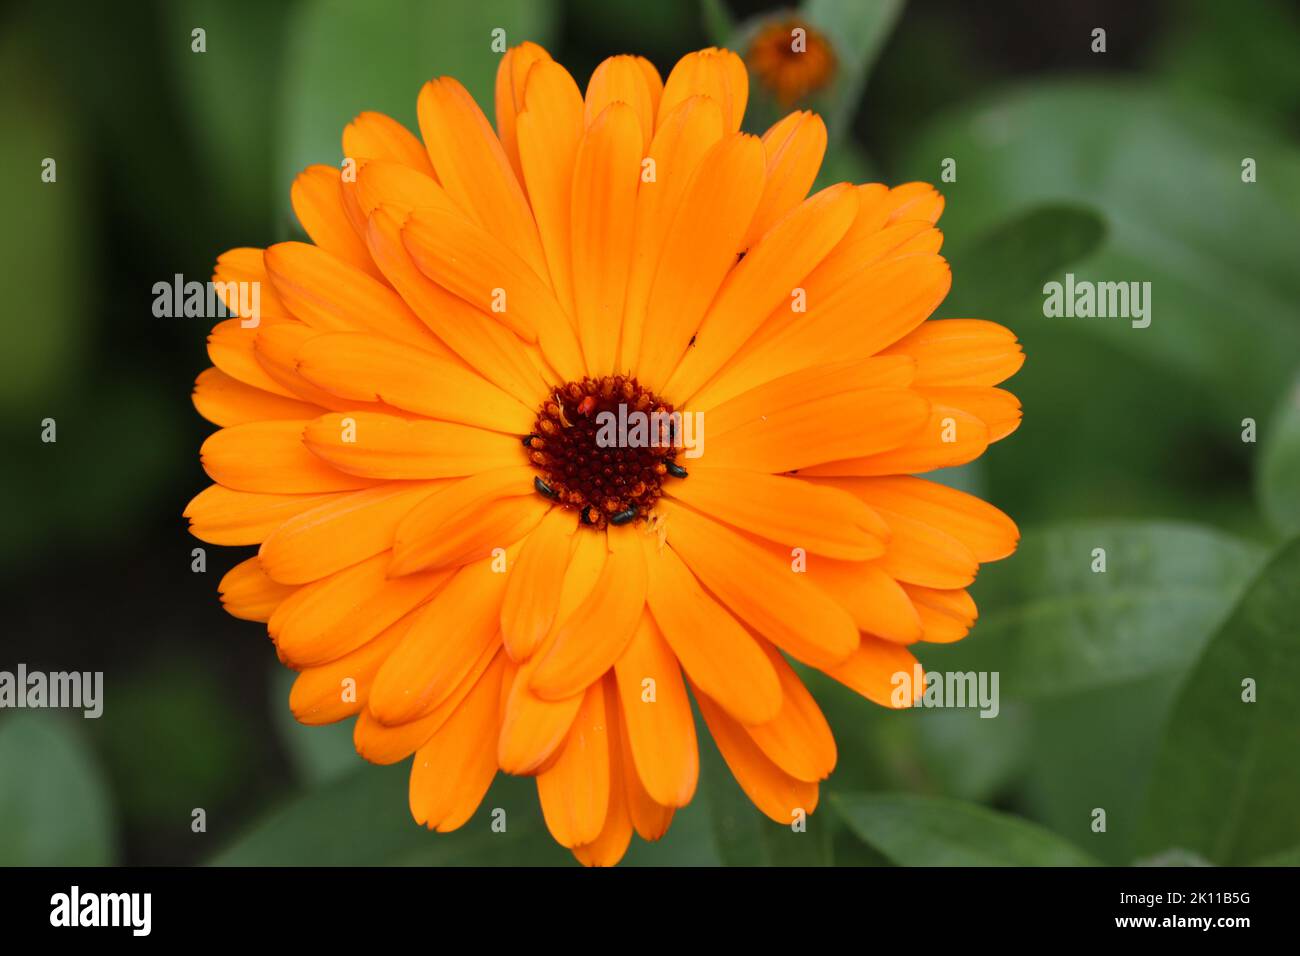 Orange pot marigold, Calendula officinalis, flower in close up with a background of blurred leaves. Stock Photo